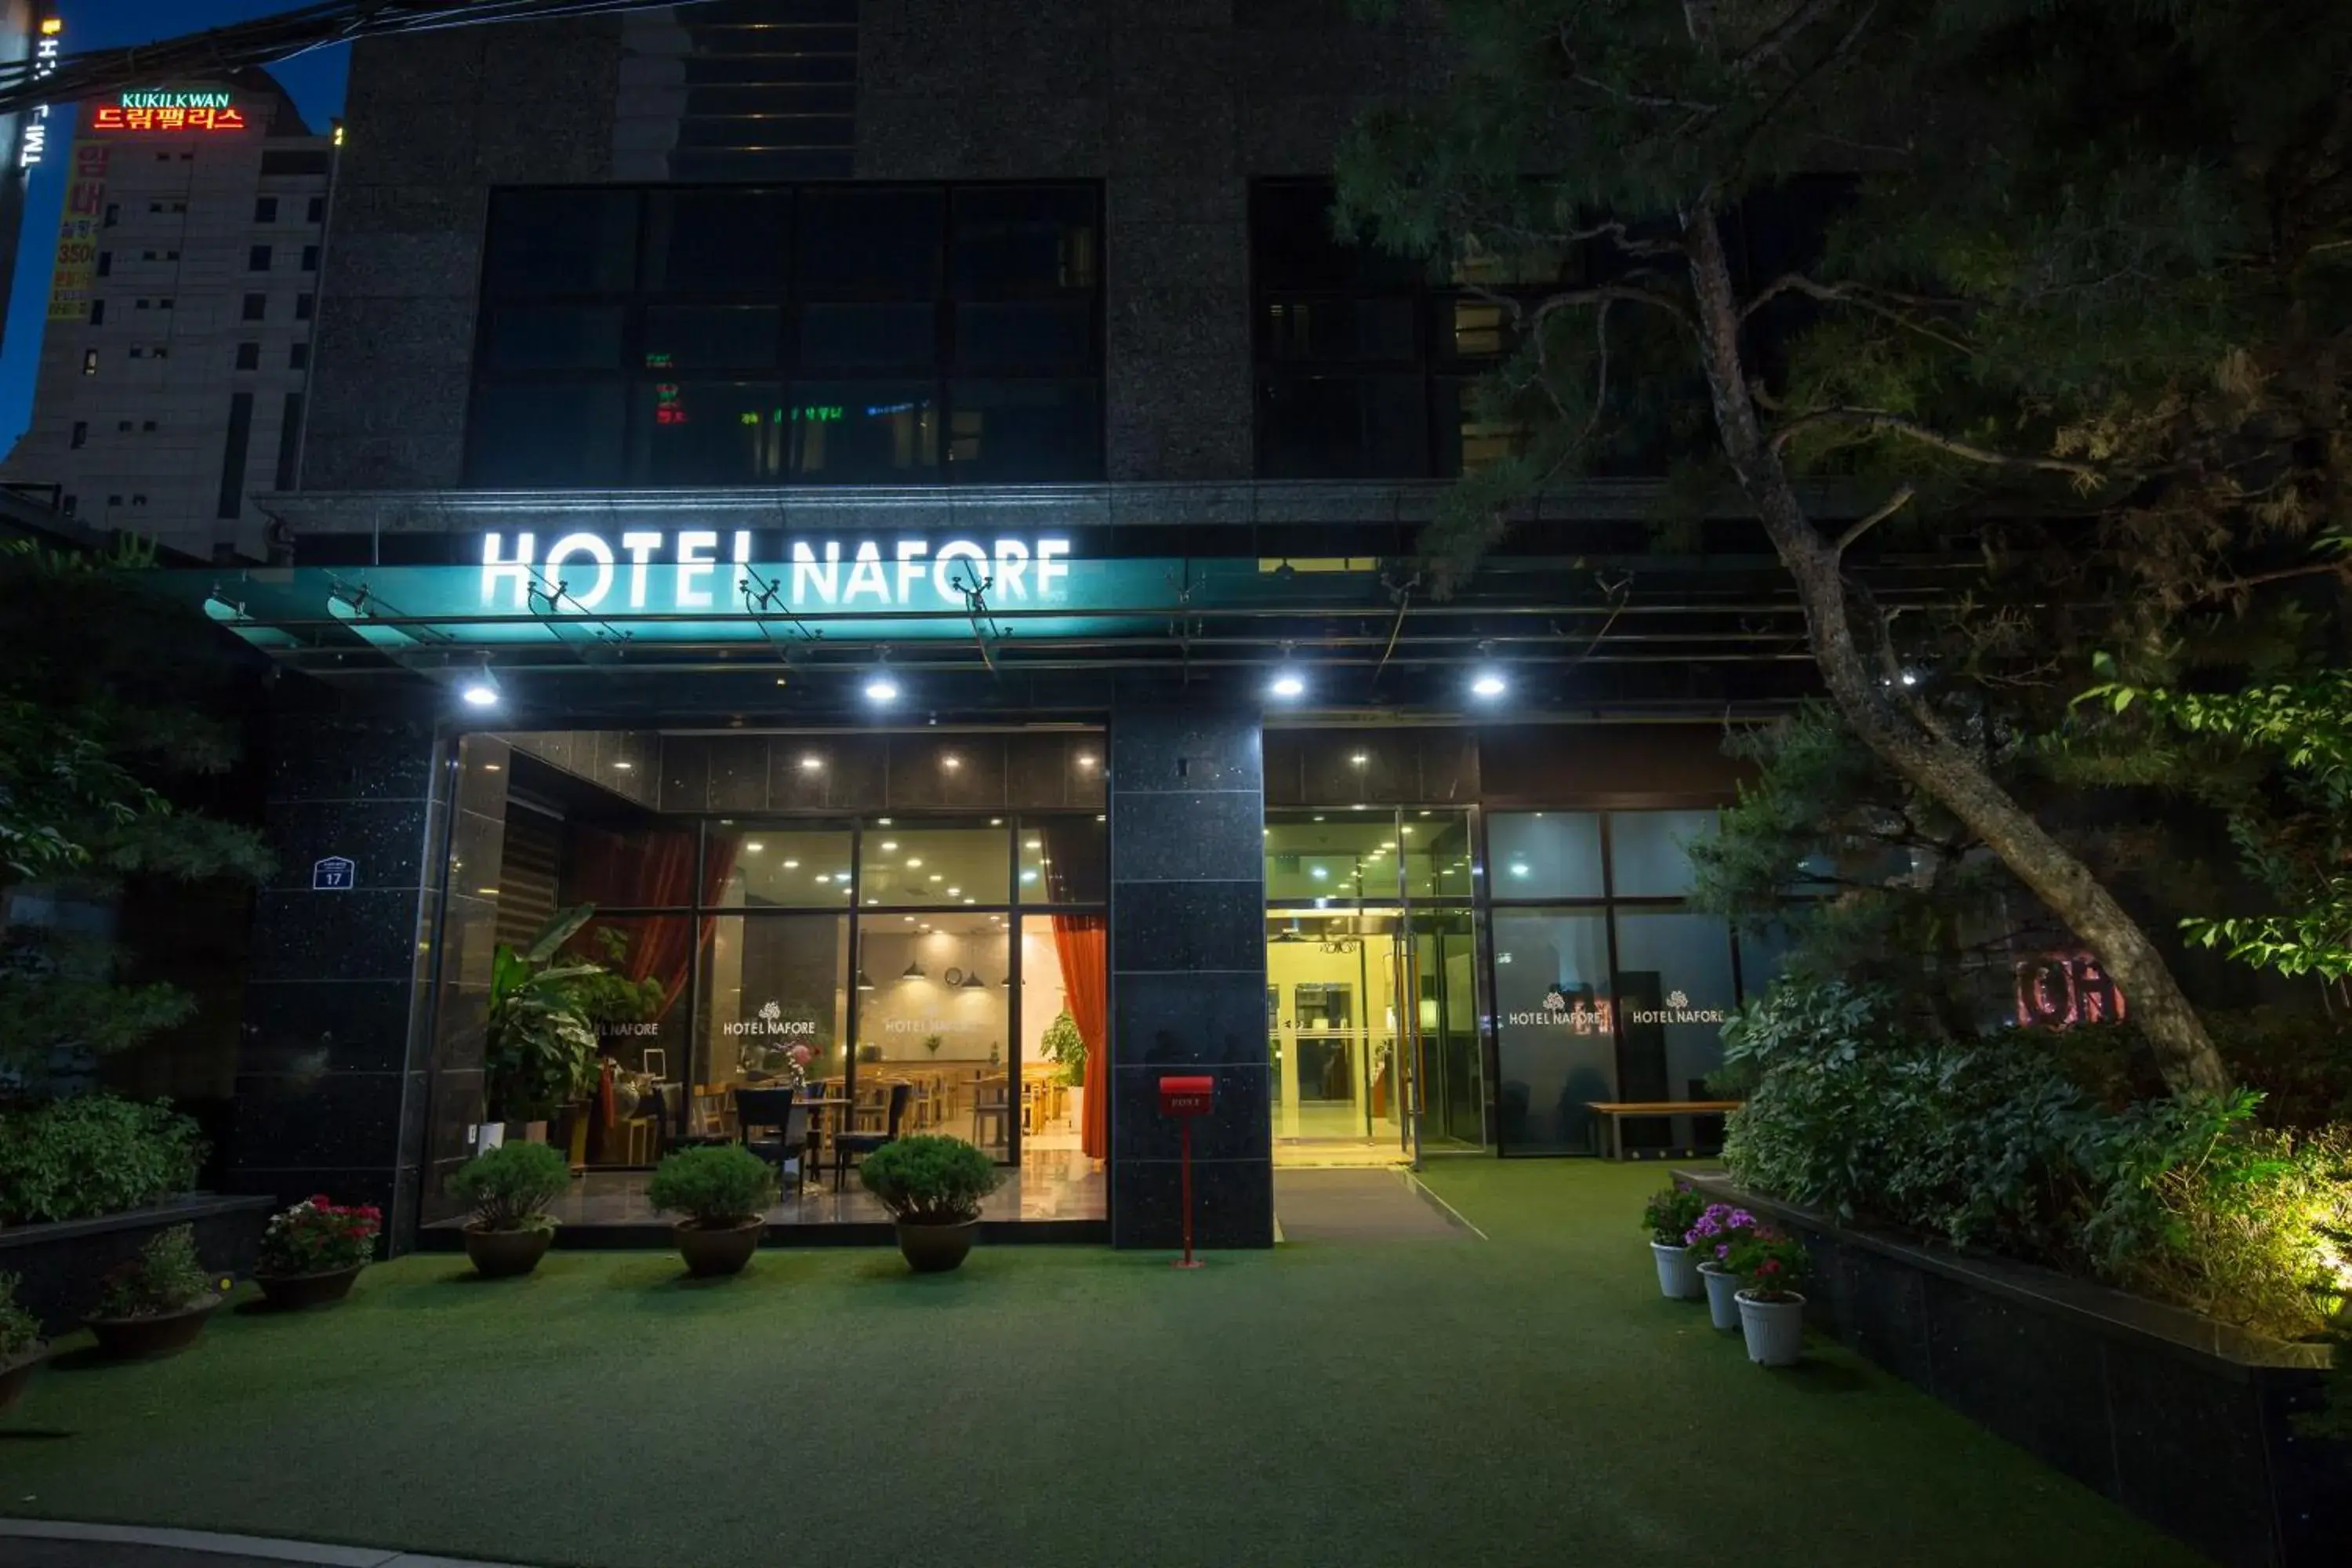 Property building in Hotel Nafore